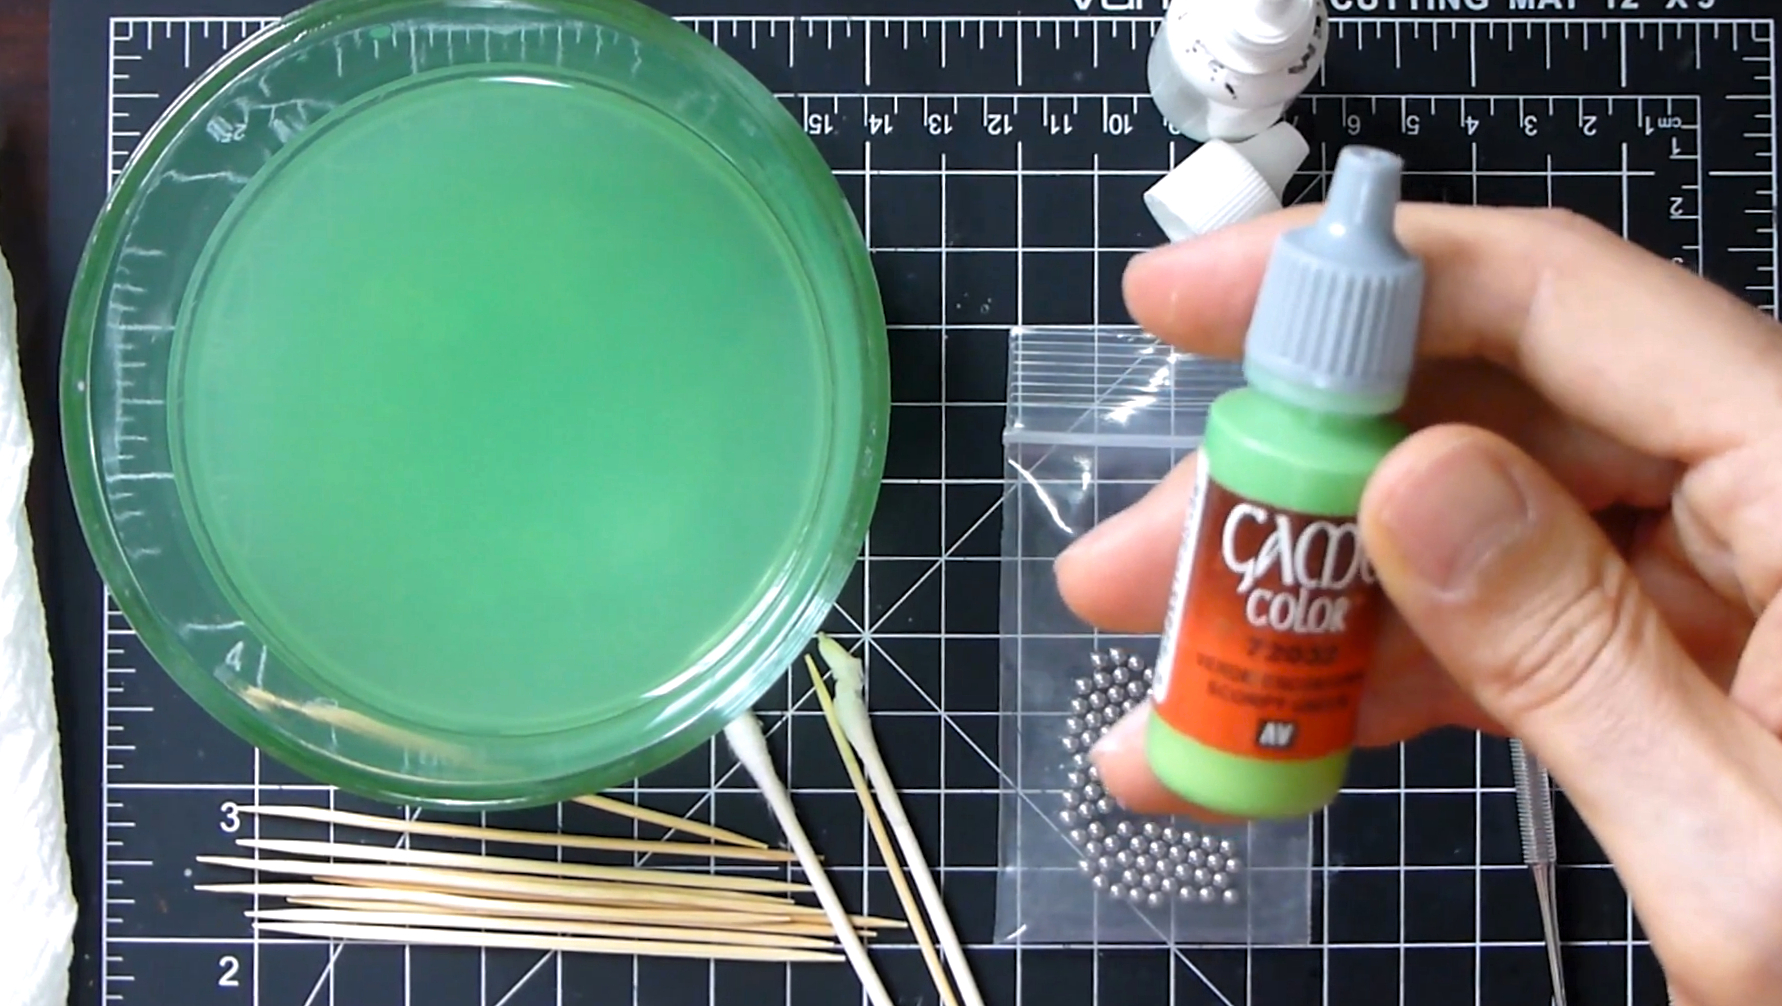 How to Breathe New Life into Dried Out Paints